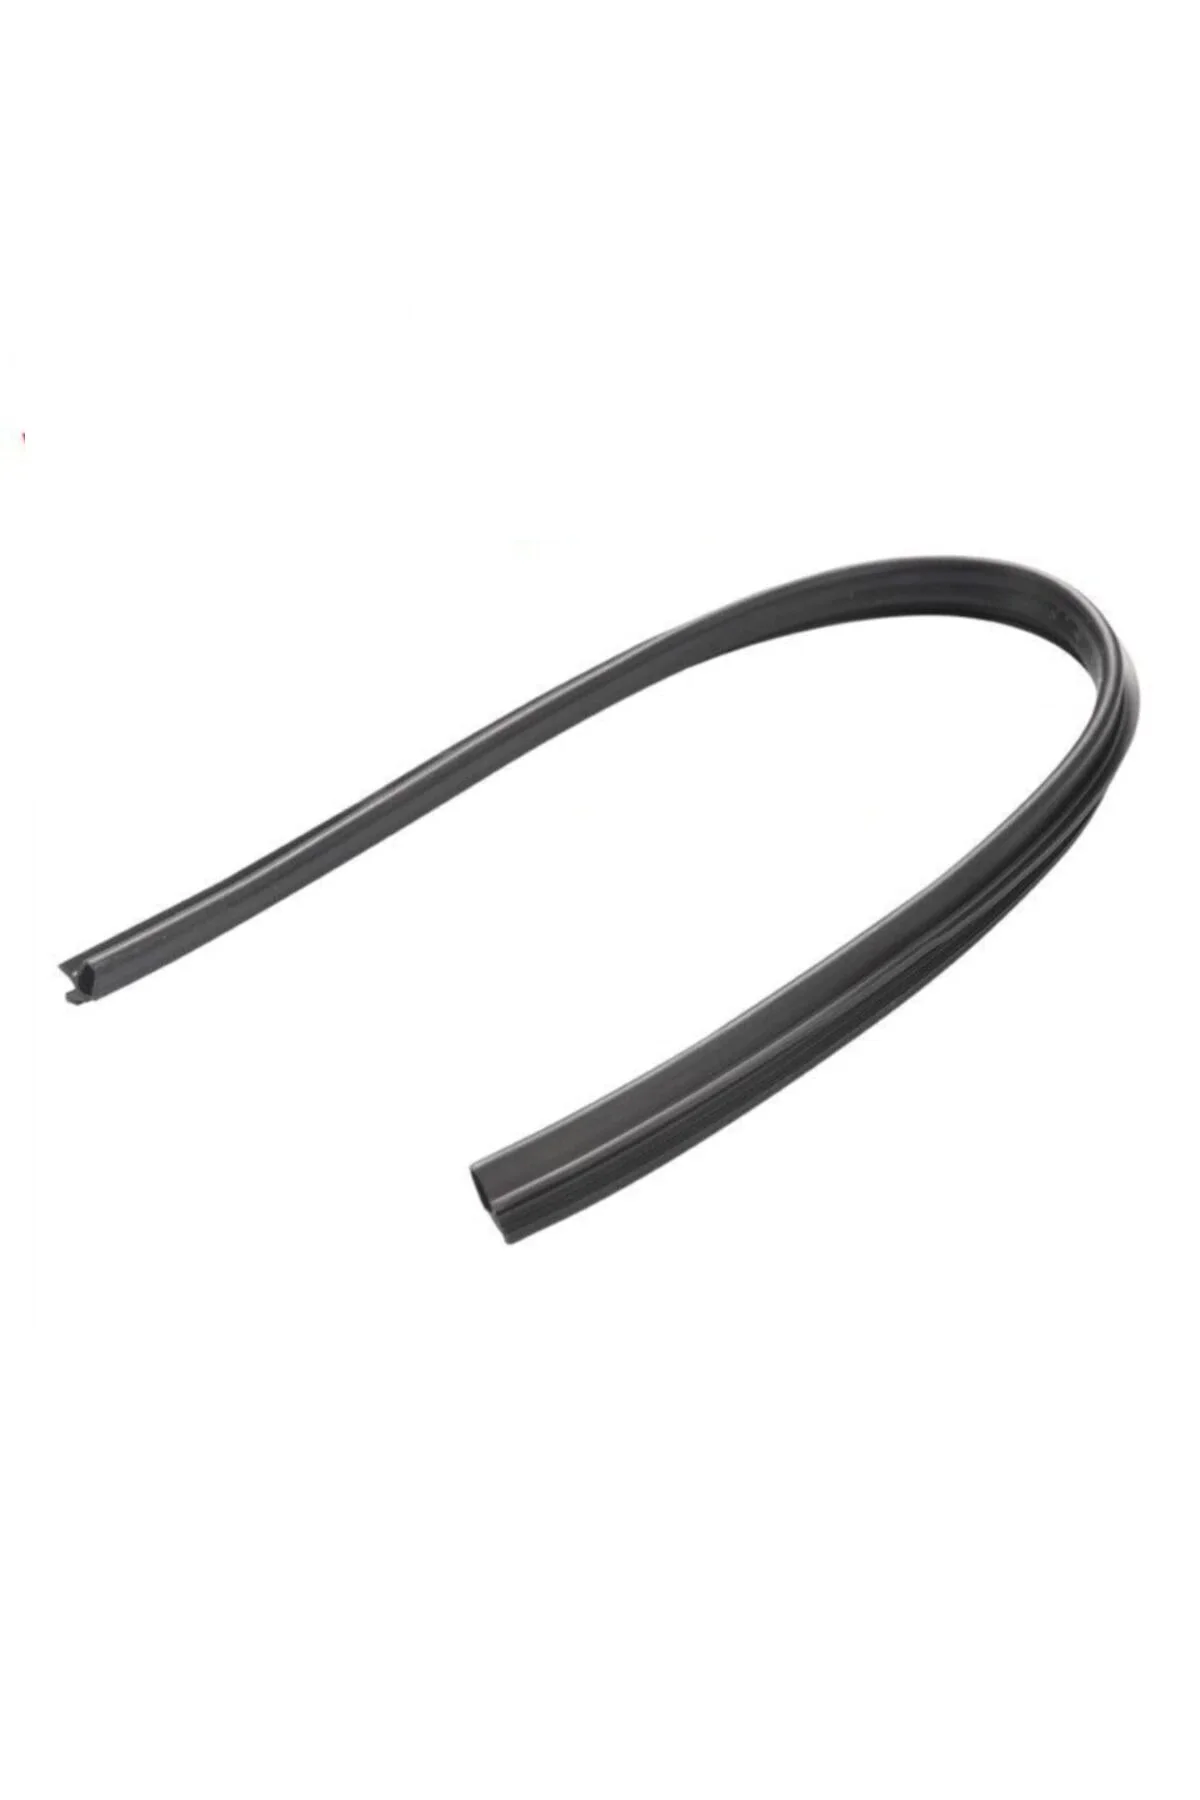 1882470200, 1882470100, 48126668734 Dishwasher Lower Door Seal 405mm Gasket Compatible Accessory Spare Part